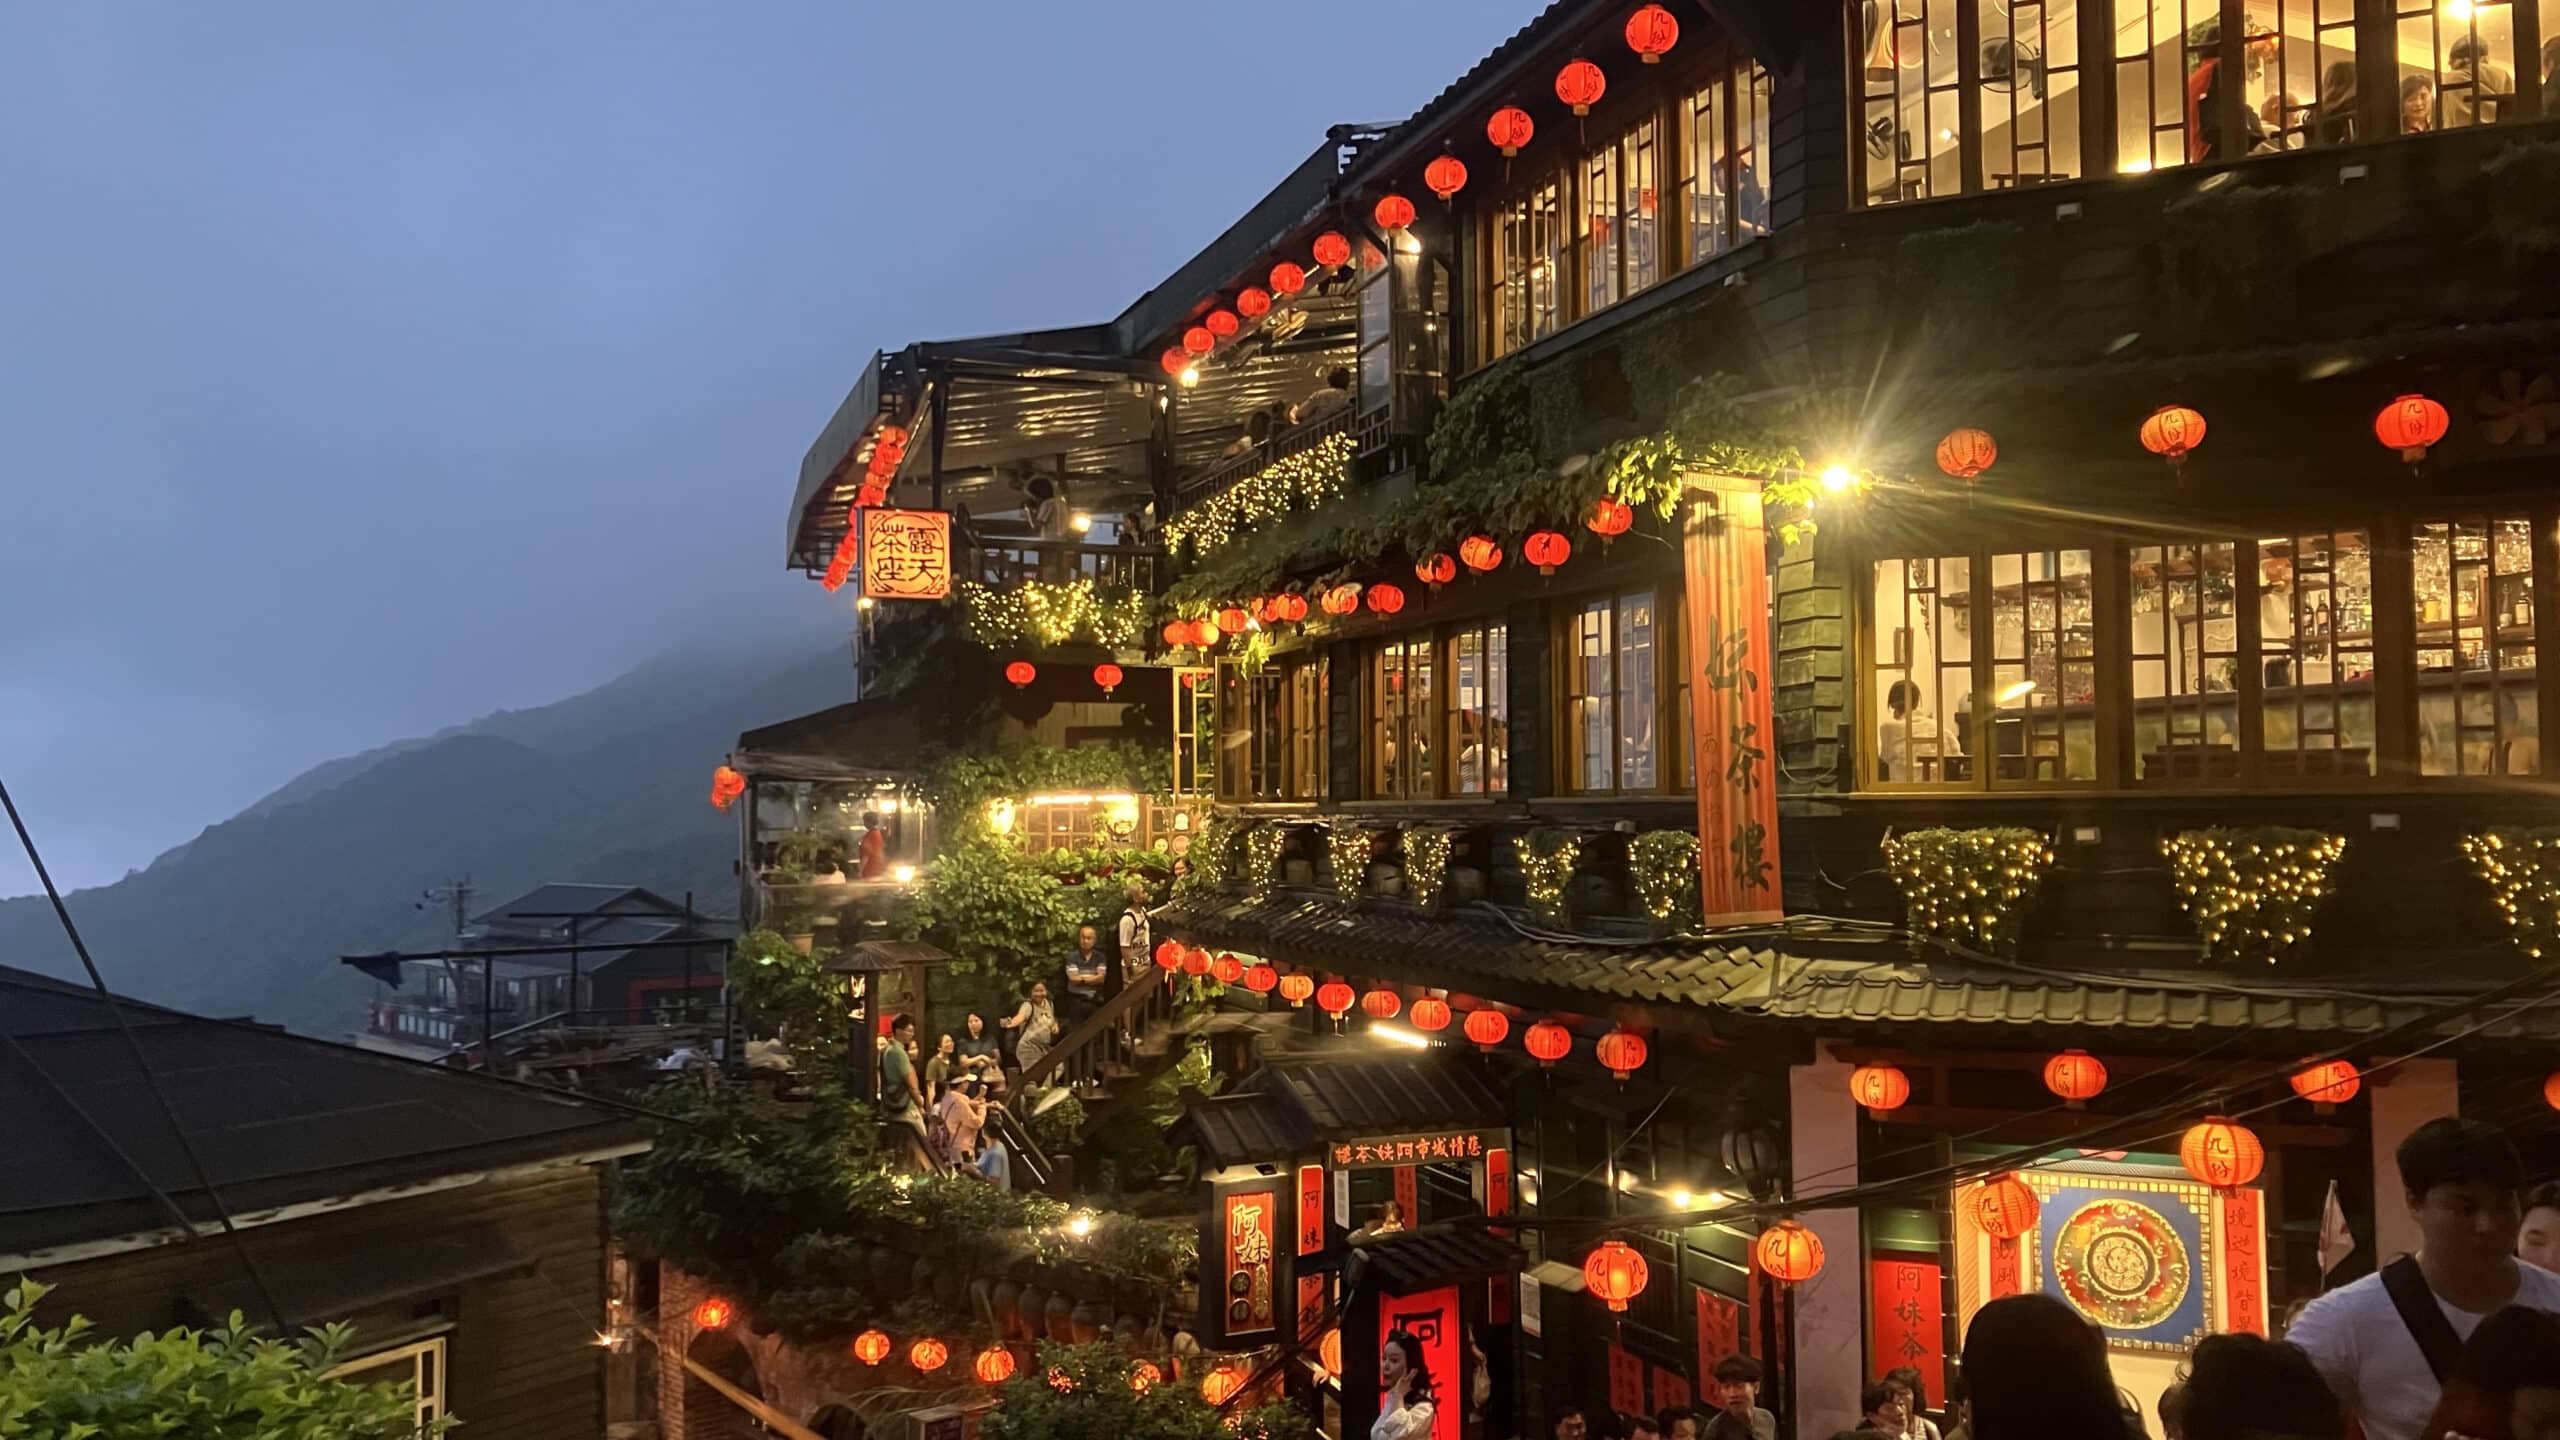 Teahouse in Jiufen, which also served as a model for a movie.